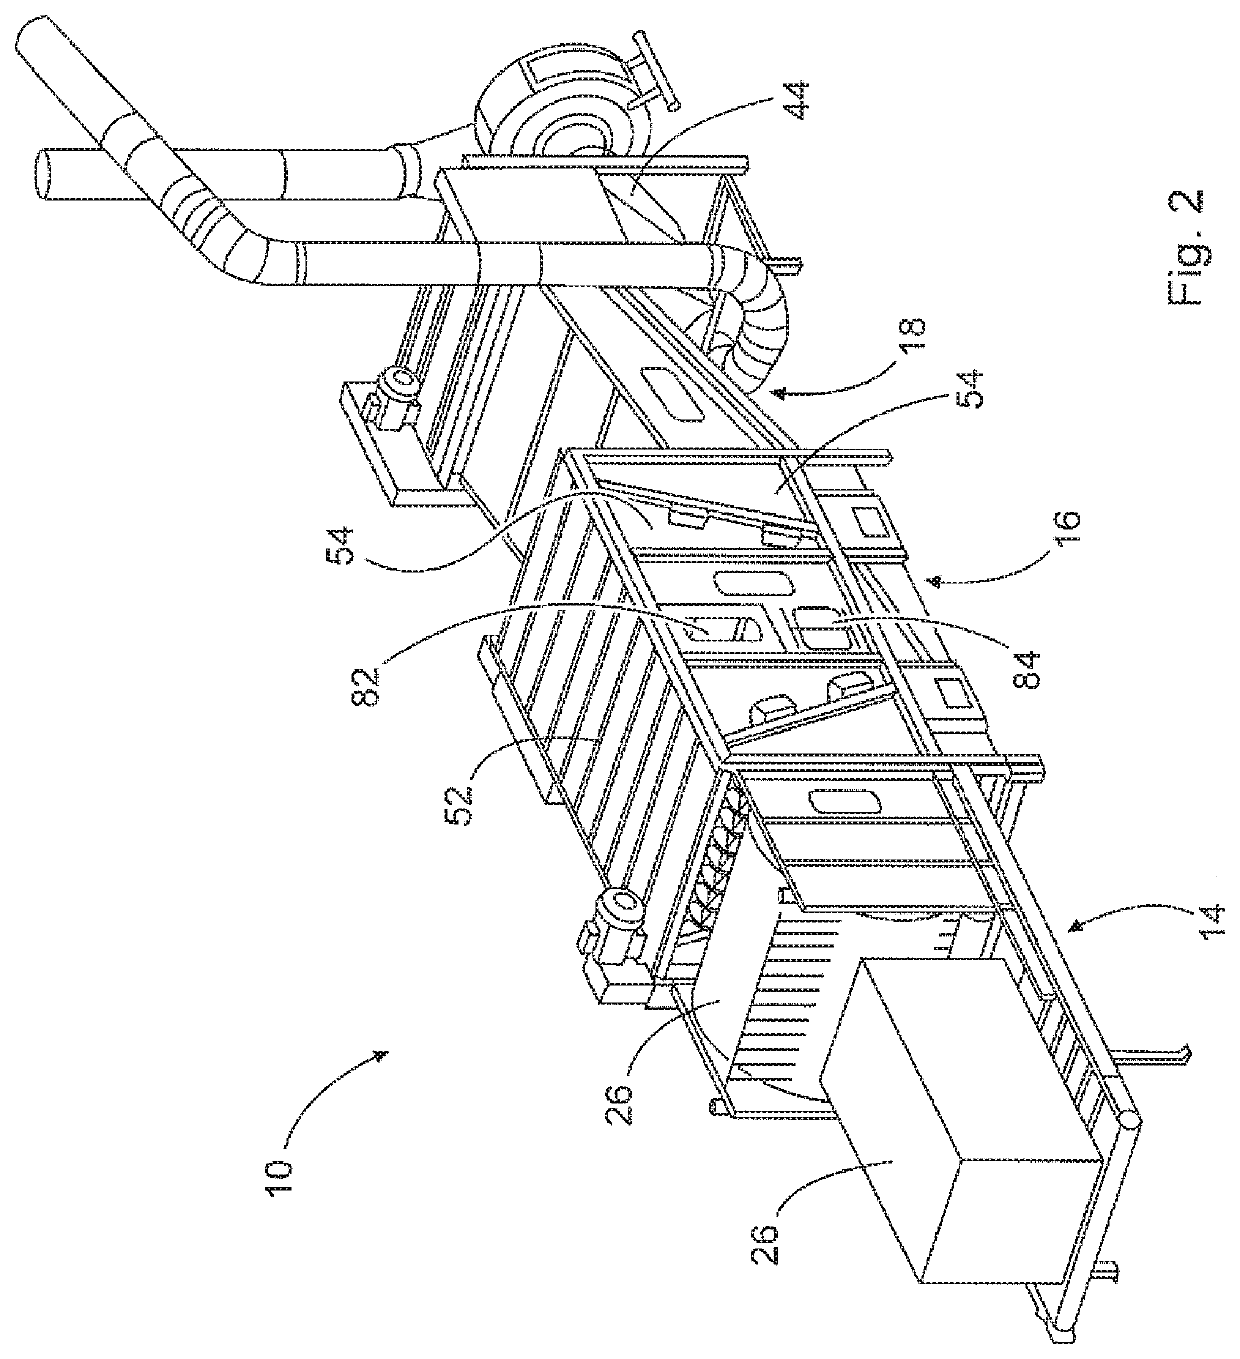 Apparatus for loosening fiber material packed in bales